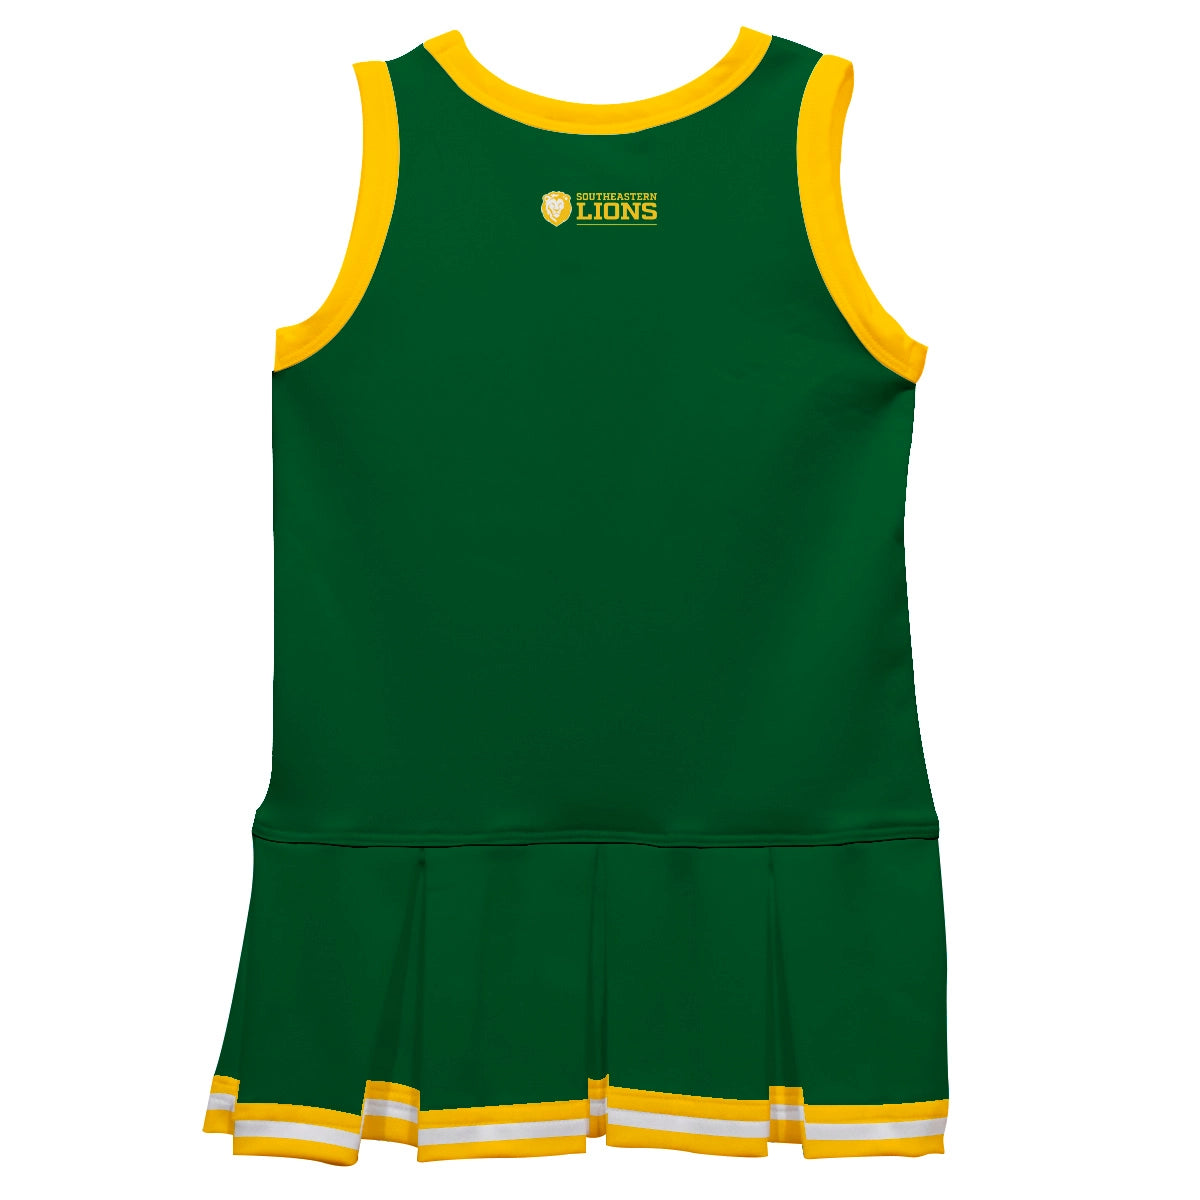 A green and yellow Southeastern Lions Cheer Set with yellow trim by Vive La Fete.